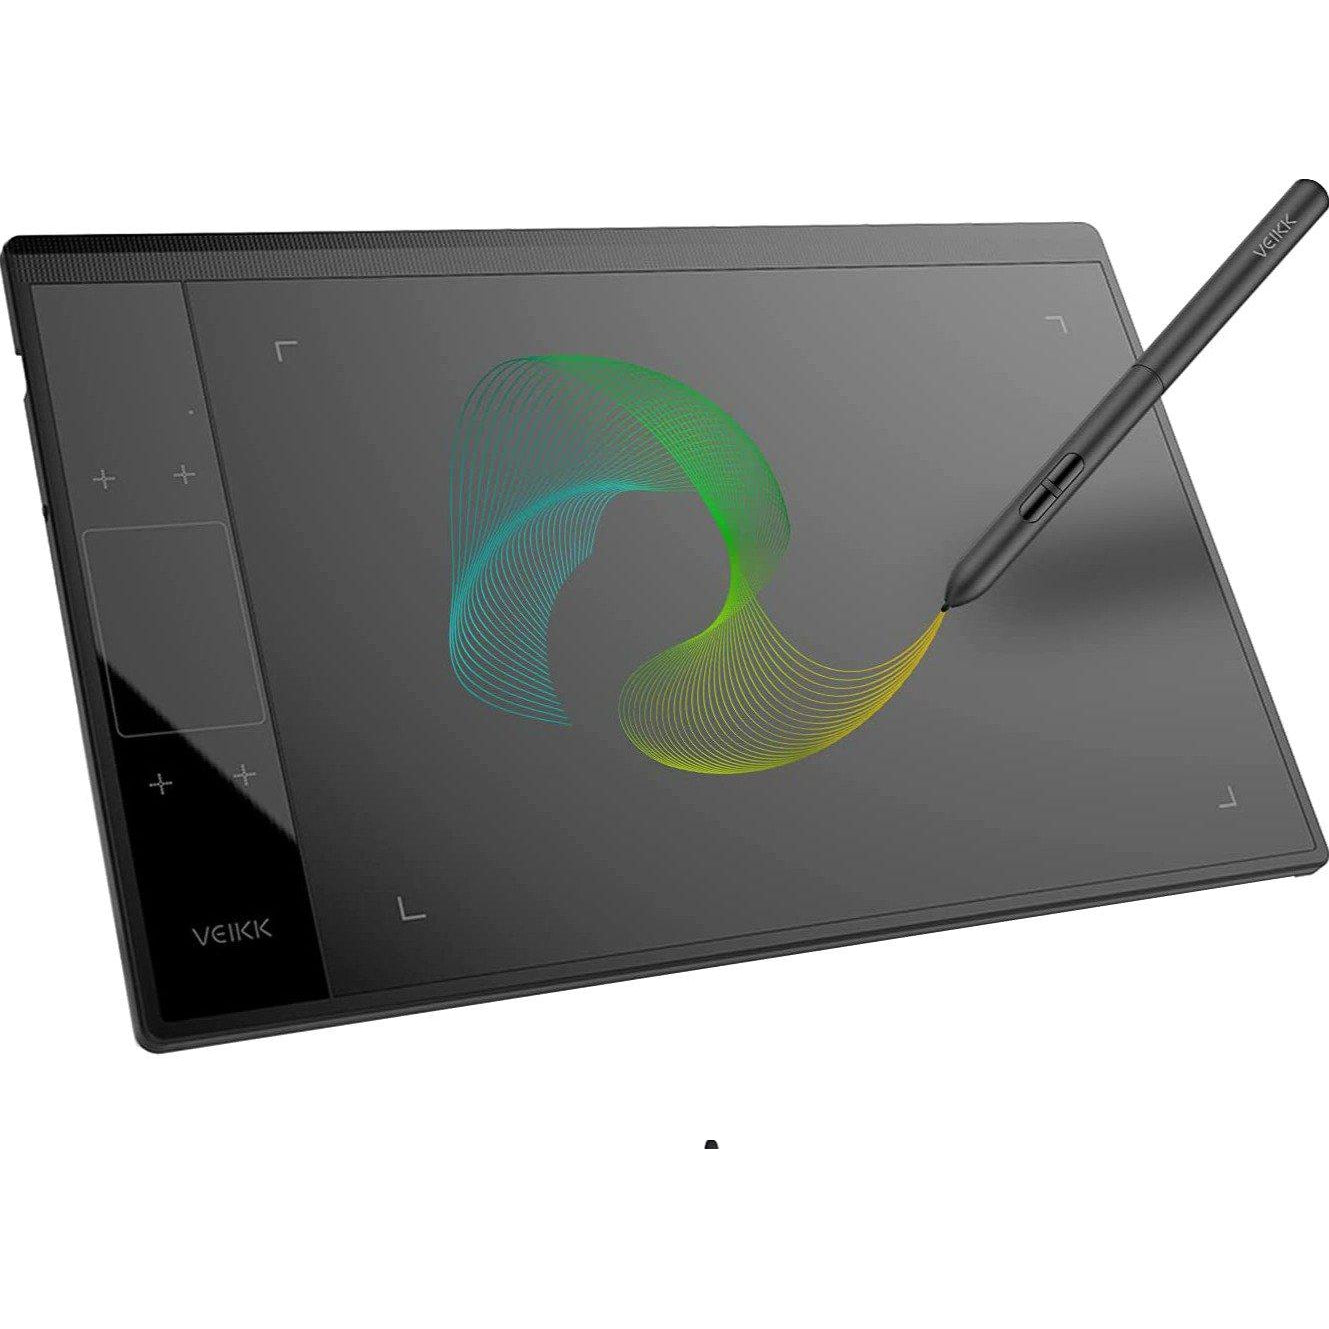 Veikk A30 10x6 Inch Drawing Tablet Graphics Tablet, Black